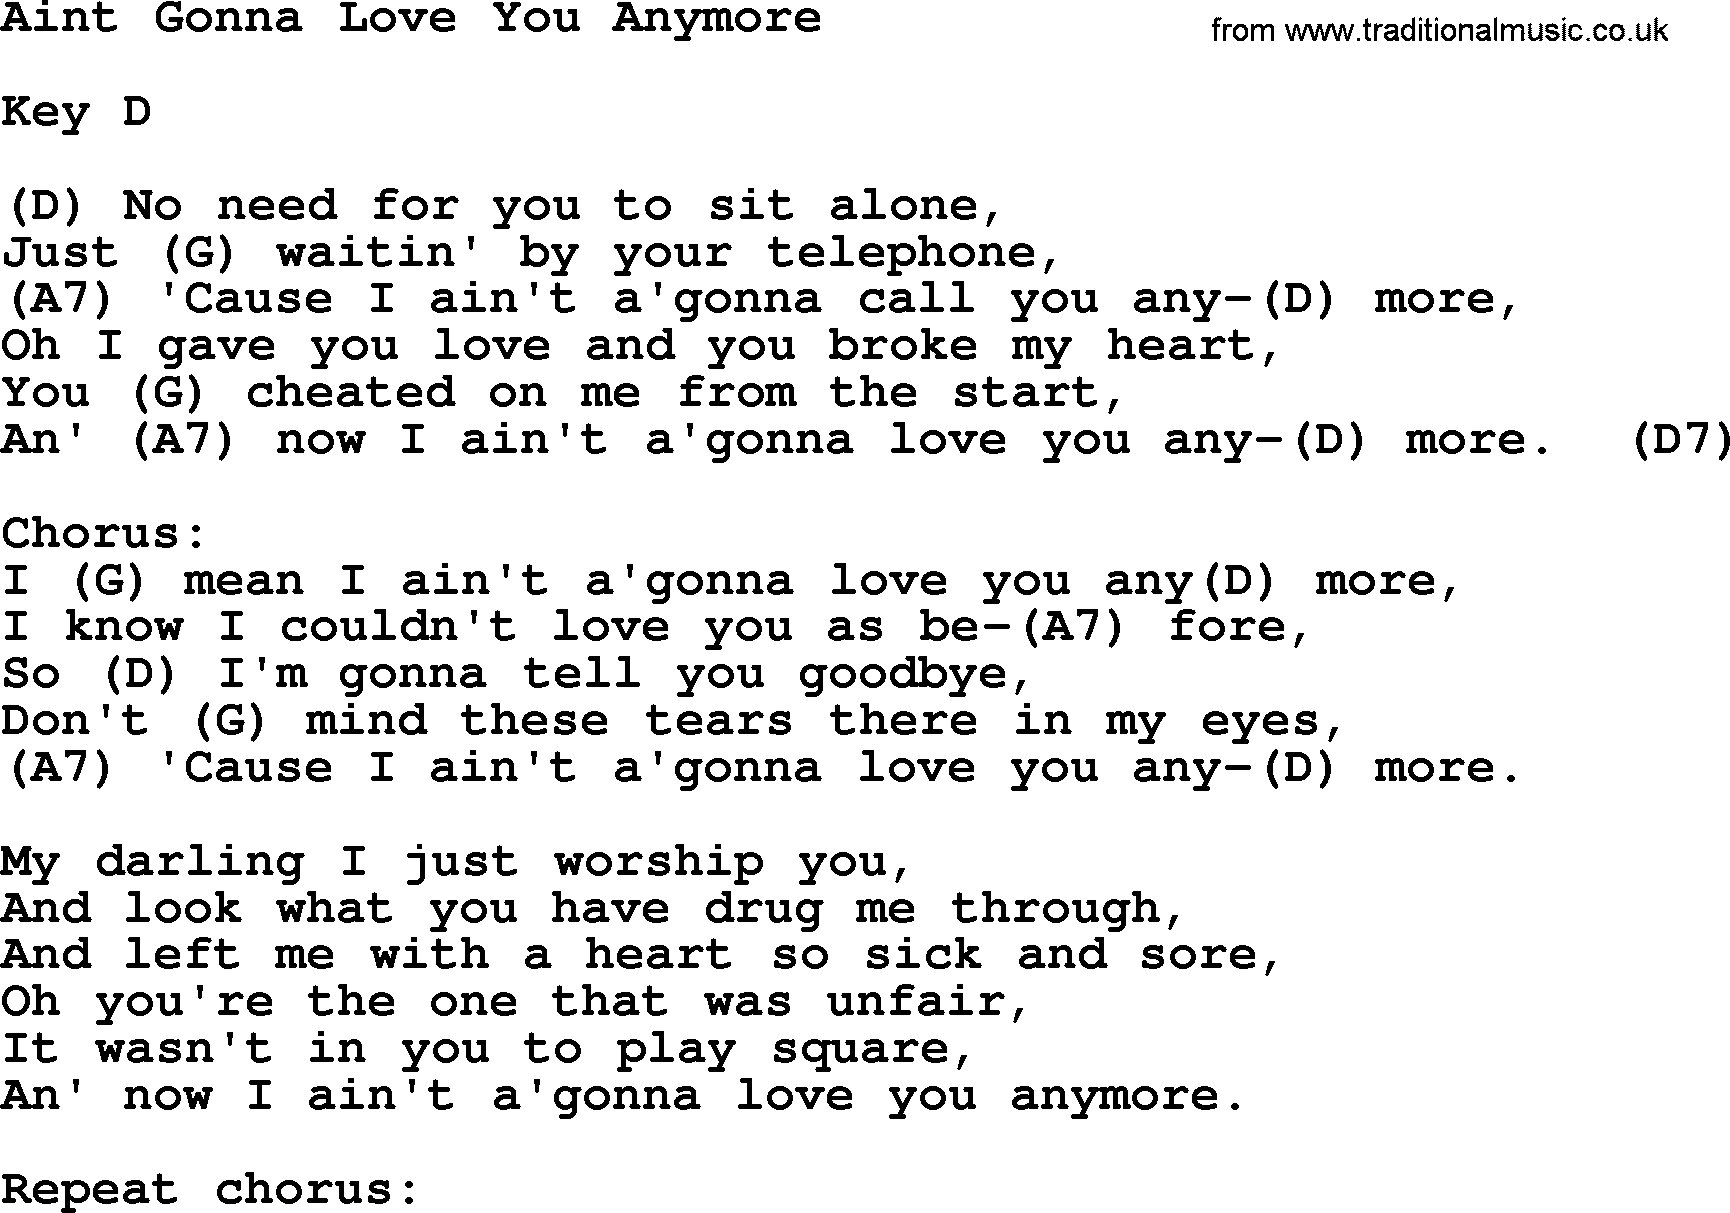 Hank Williams song Aint Gonna Love You Anymore, lyrics and chords